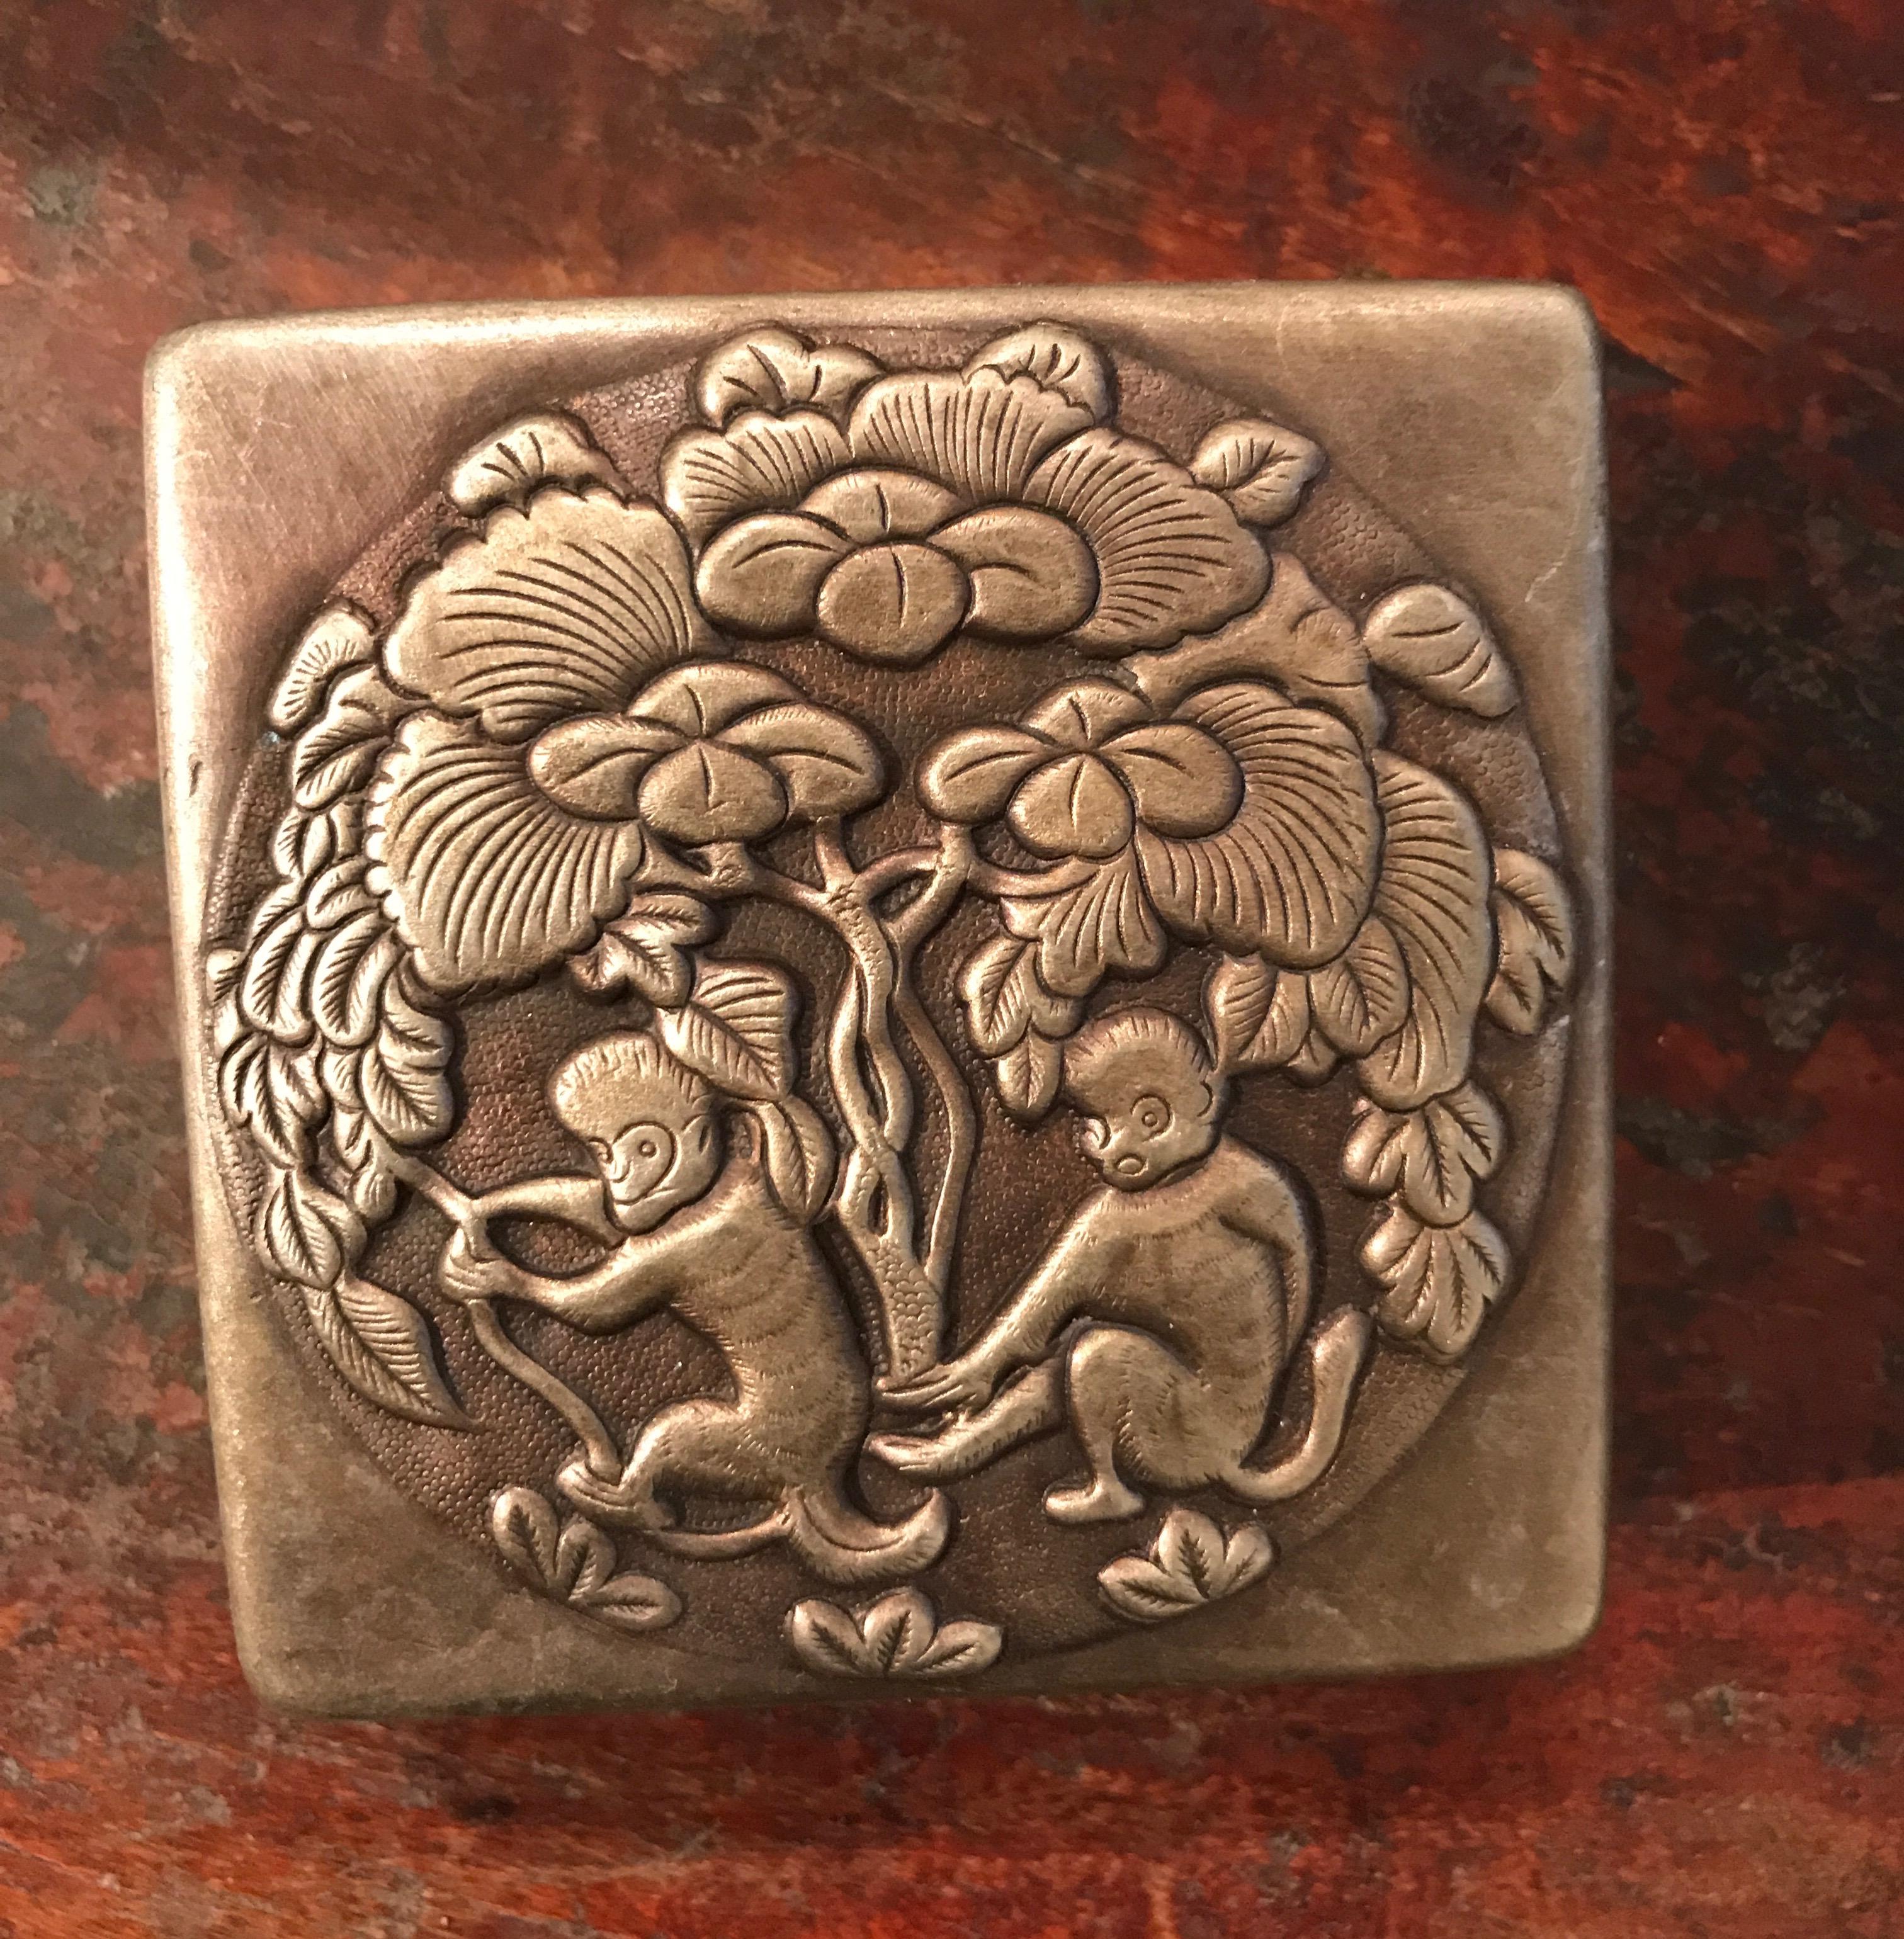 An old and nicely worn bronze Chinese ink box with carefully crafted whimsical images of two prancing monkeys. A great representation of turn of the Century China, showing it's years of use. This piece is practical as well as beautiful. It works